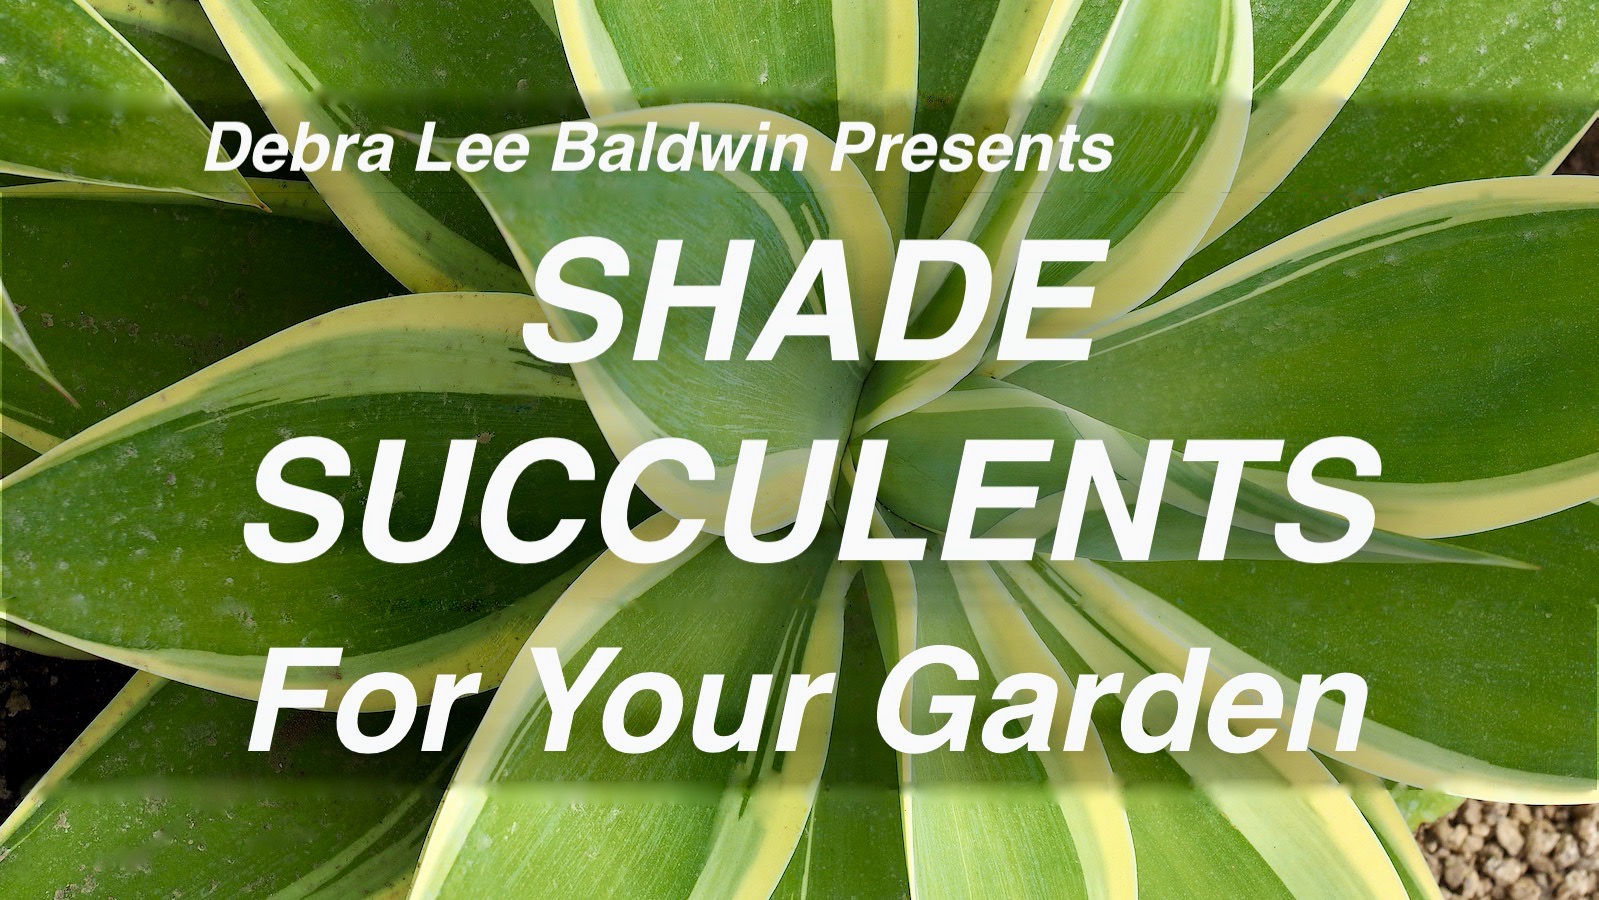 Shade succulents video